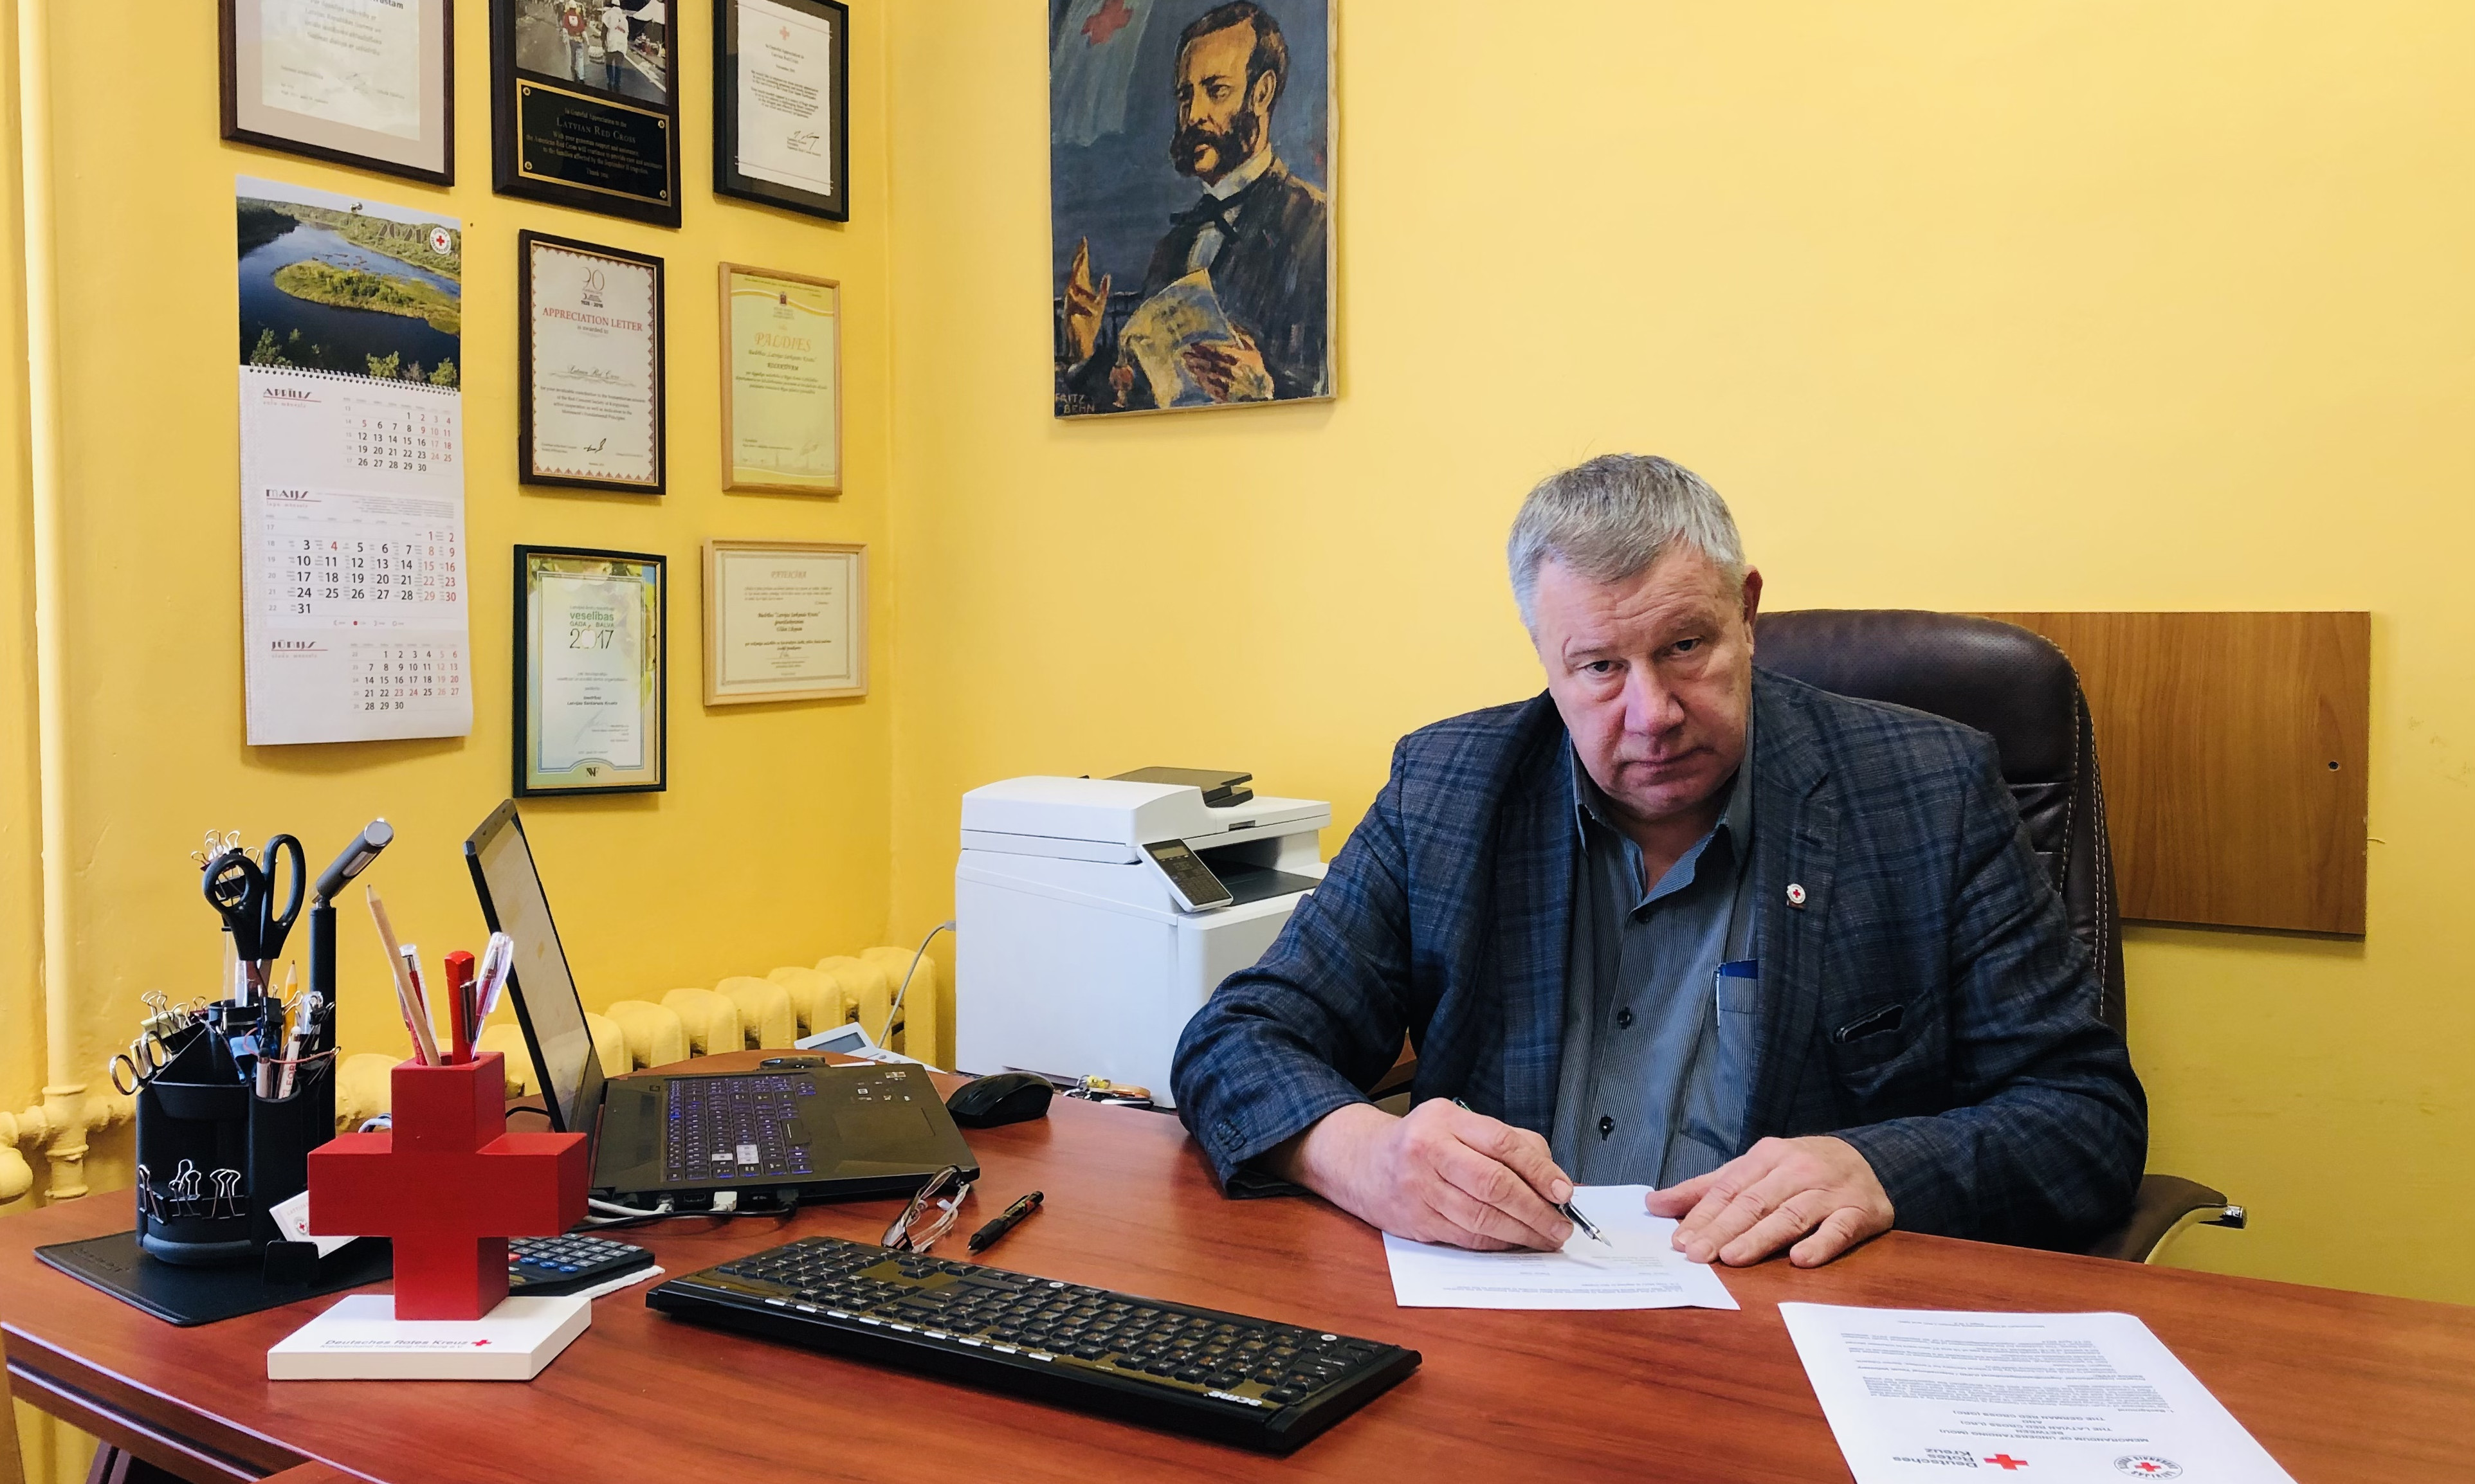 Uldis Likops, Secretary General of the Latvian Red Cross. Sitting at a desk. Signing a document.